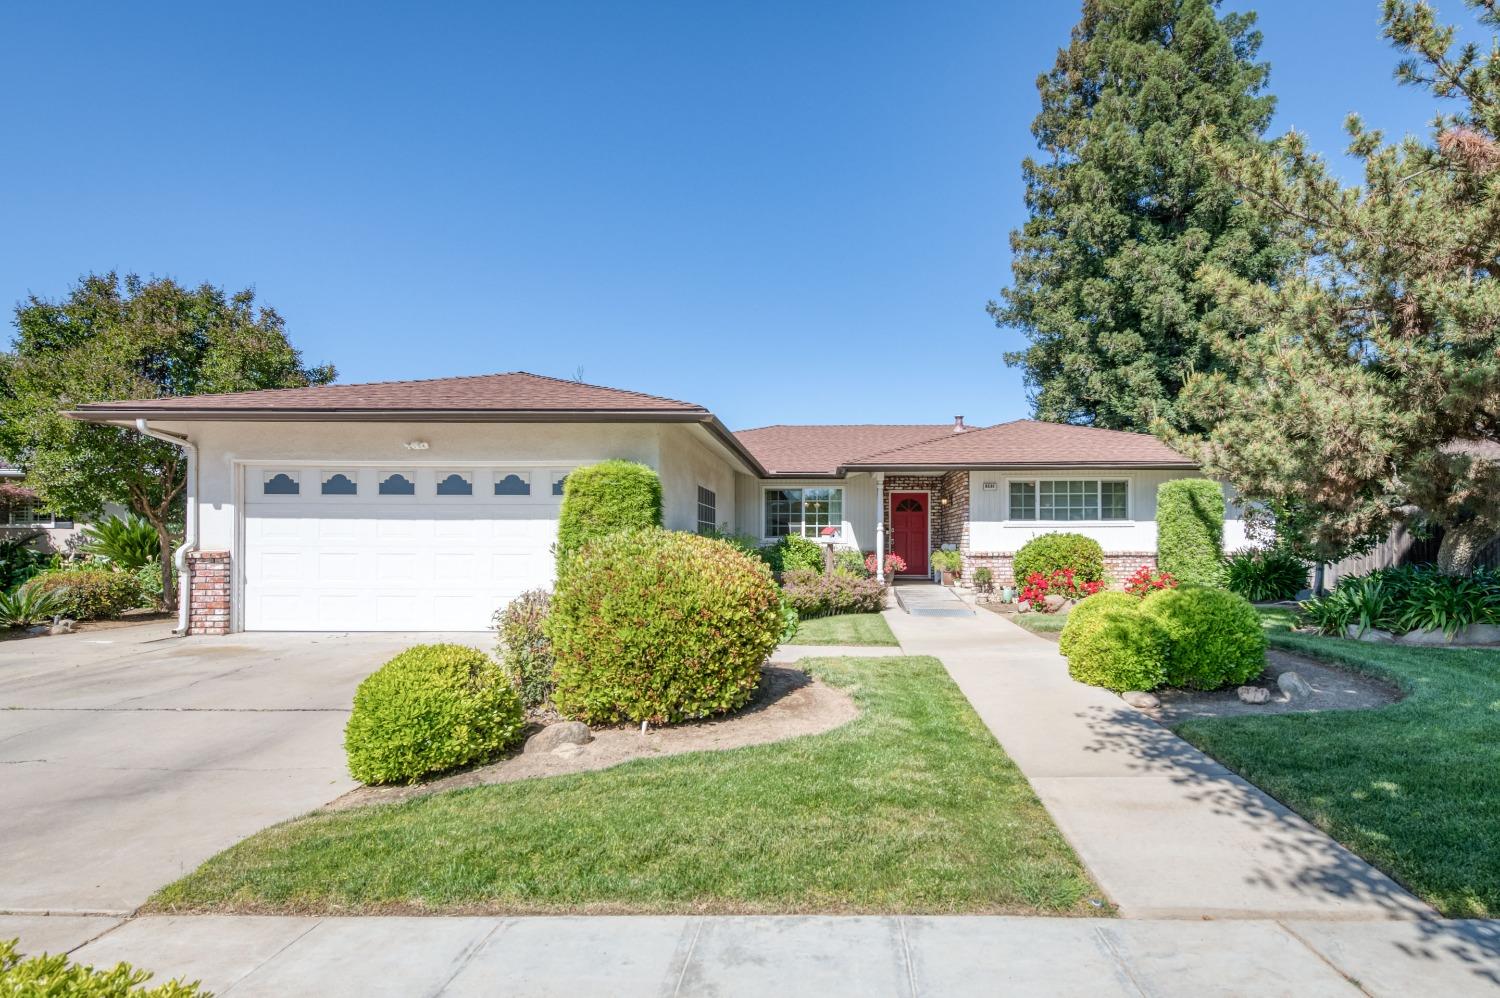 Photo of 6591 N Rowell Ave in Fresno, CA